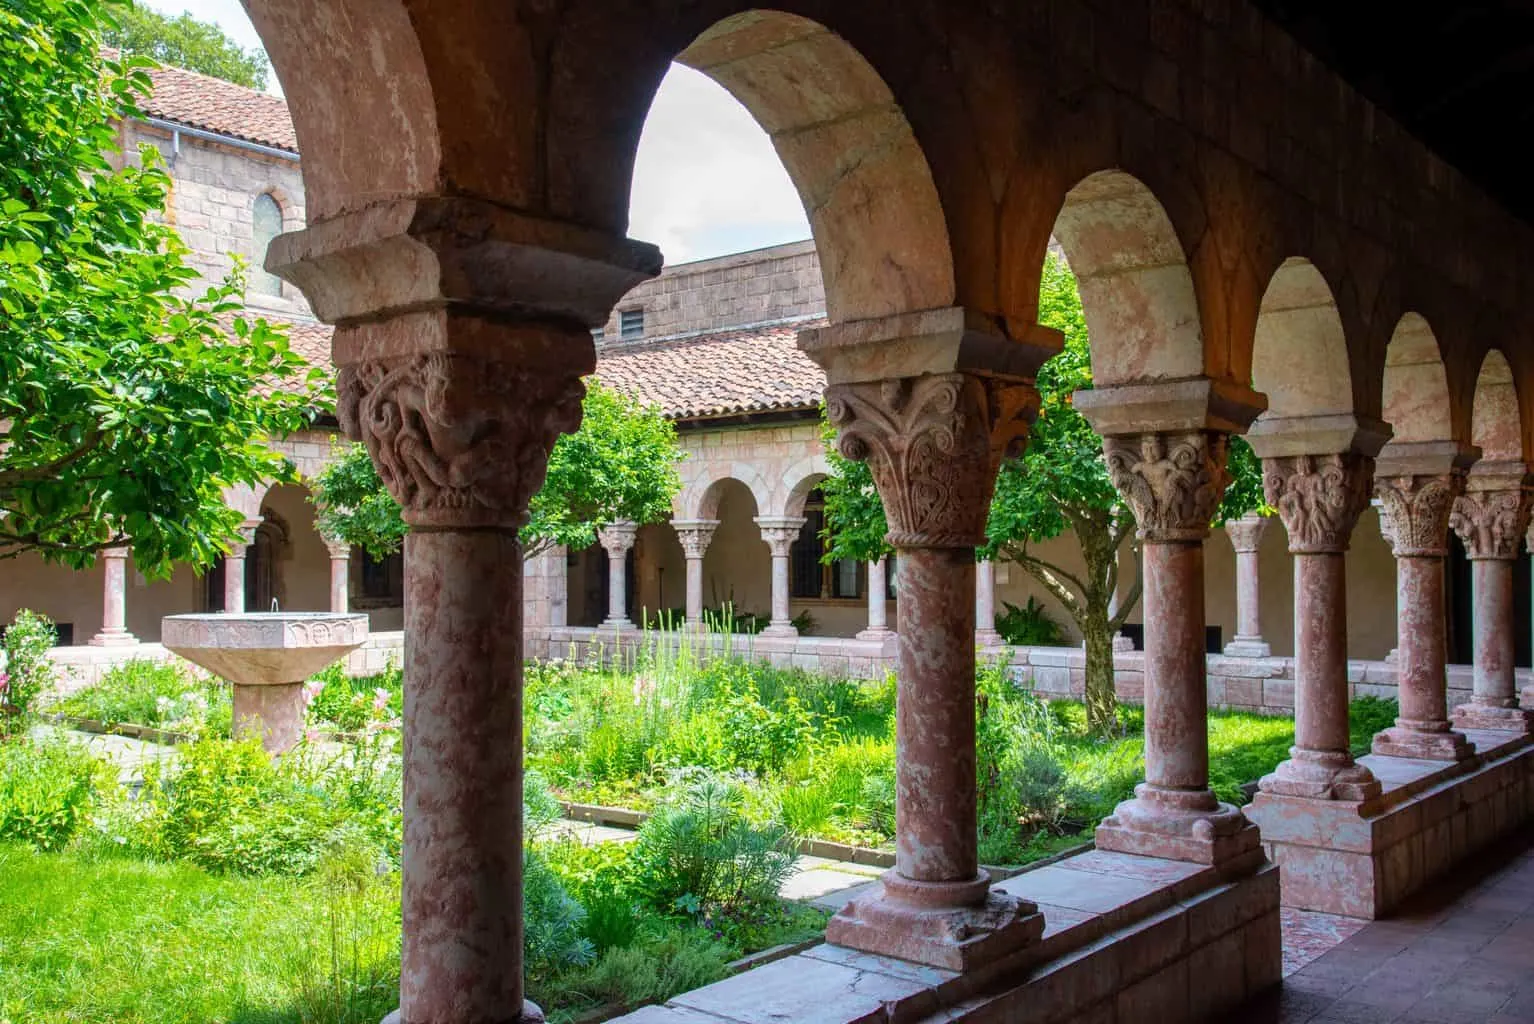 Cloister with areches and columns in NYC